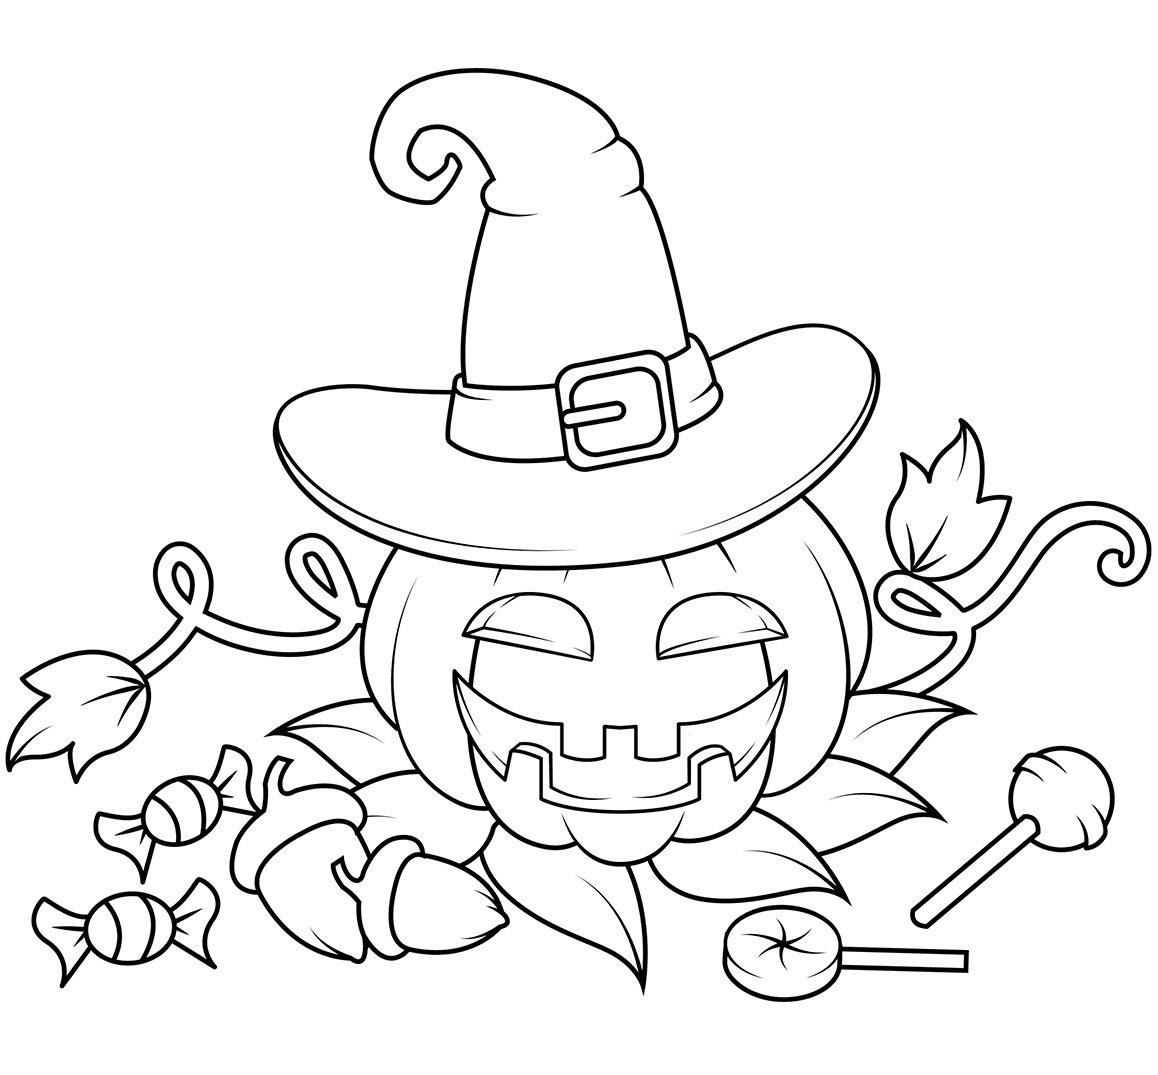 Jack O Lantern In A Witch Hat With Candies Halloween Coloring Page